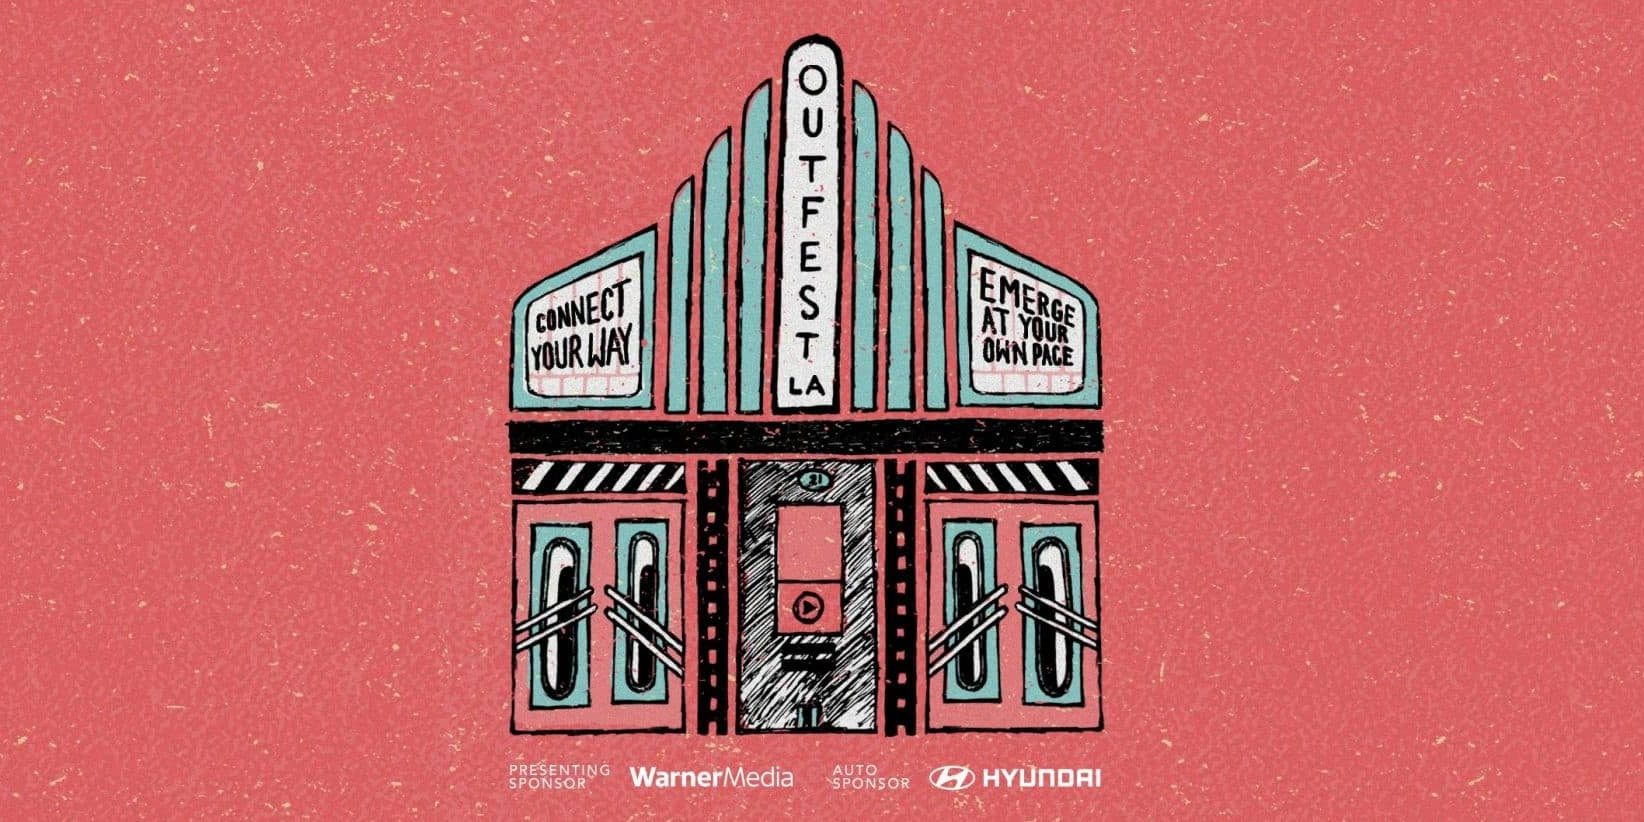 Hyundai is the Official Automotive Sponsor of the 2021 Outfest Los Angeles Film Festival for the Fourth Consecutive Year